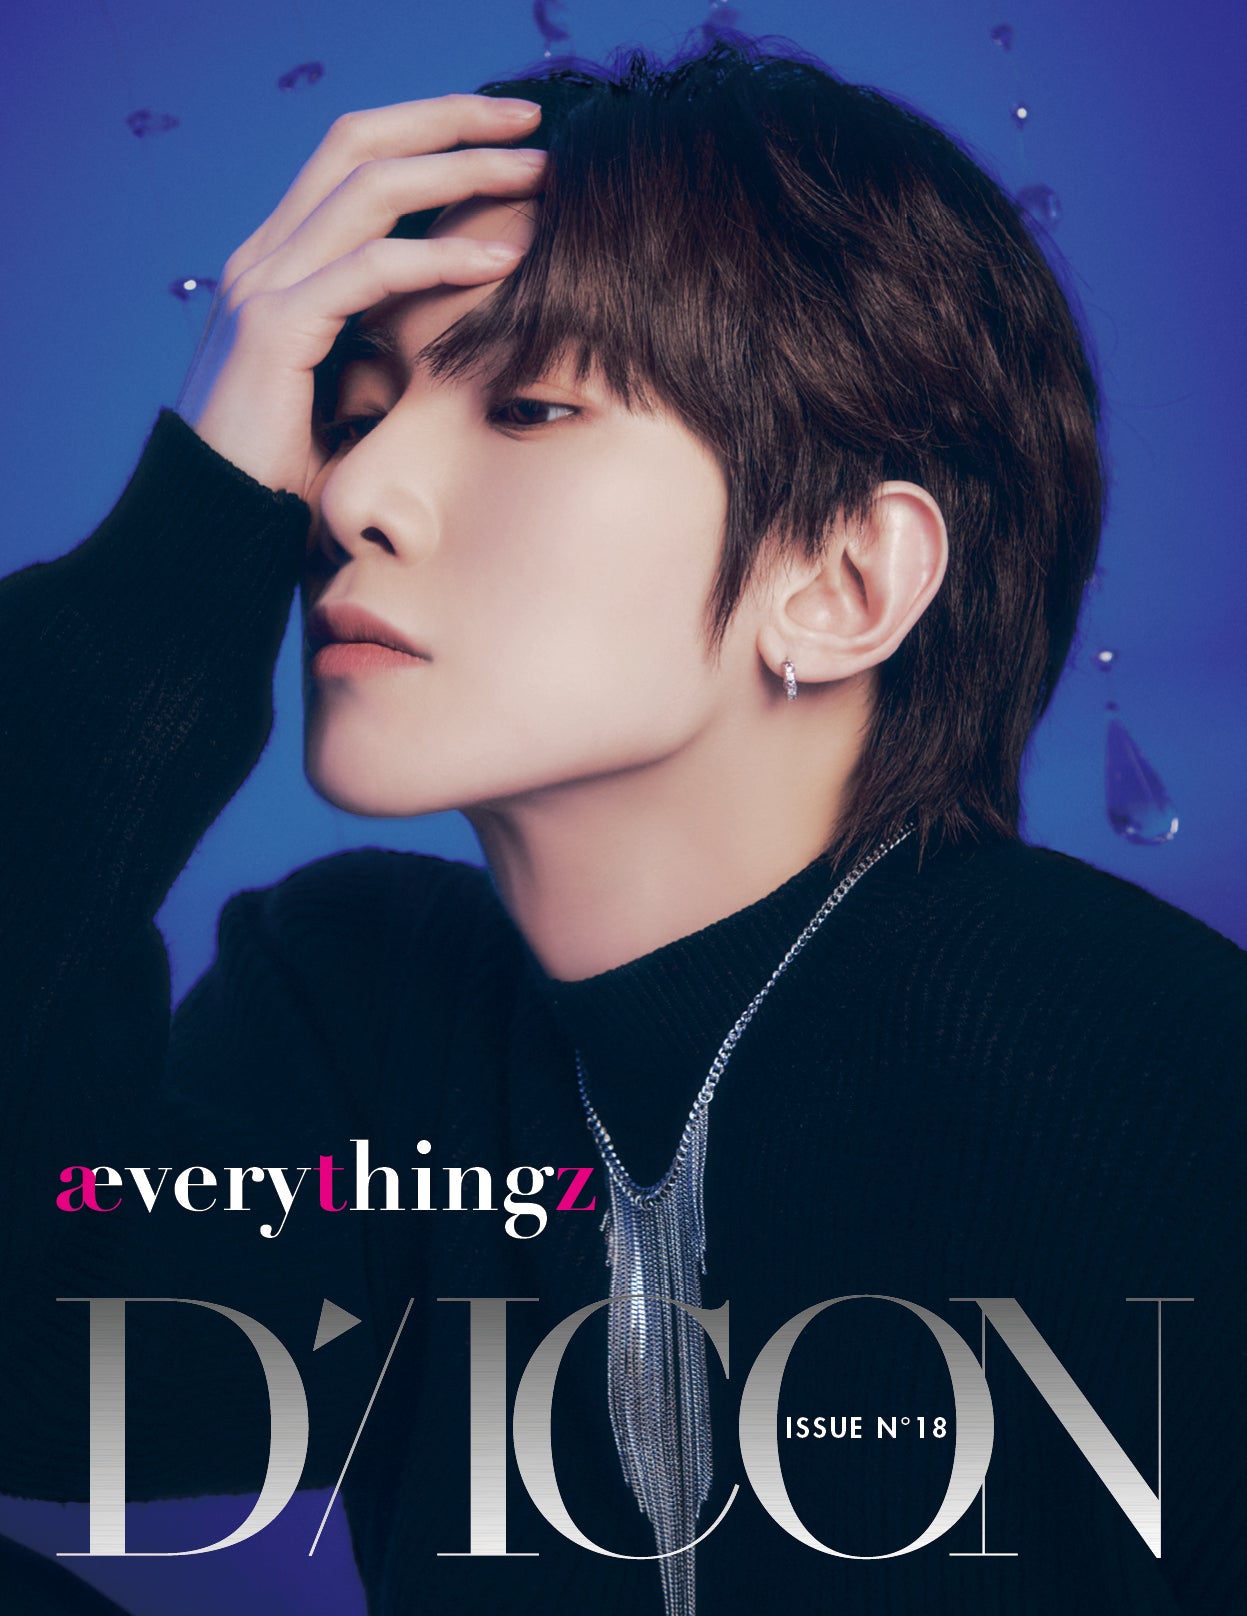 ATEEZ - DICON ISSUE  N°18 AEVERYTHINGZ YEOSANG